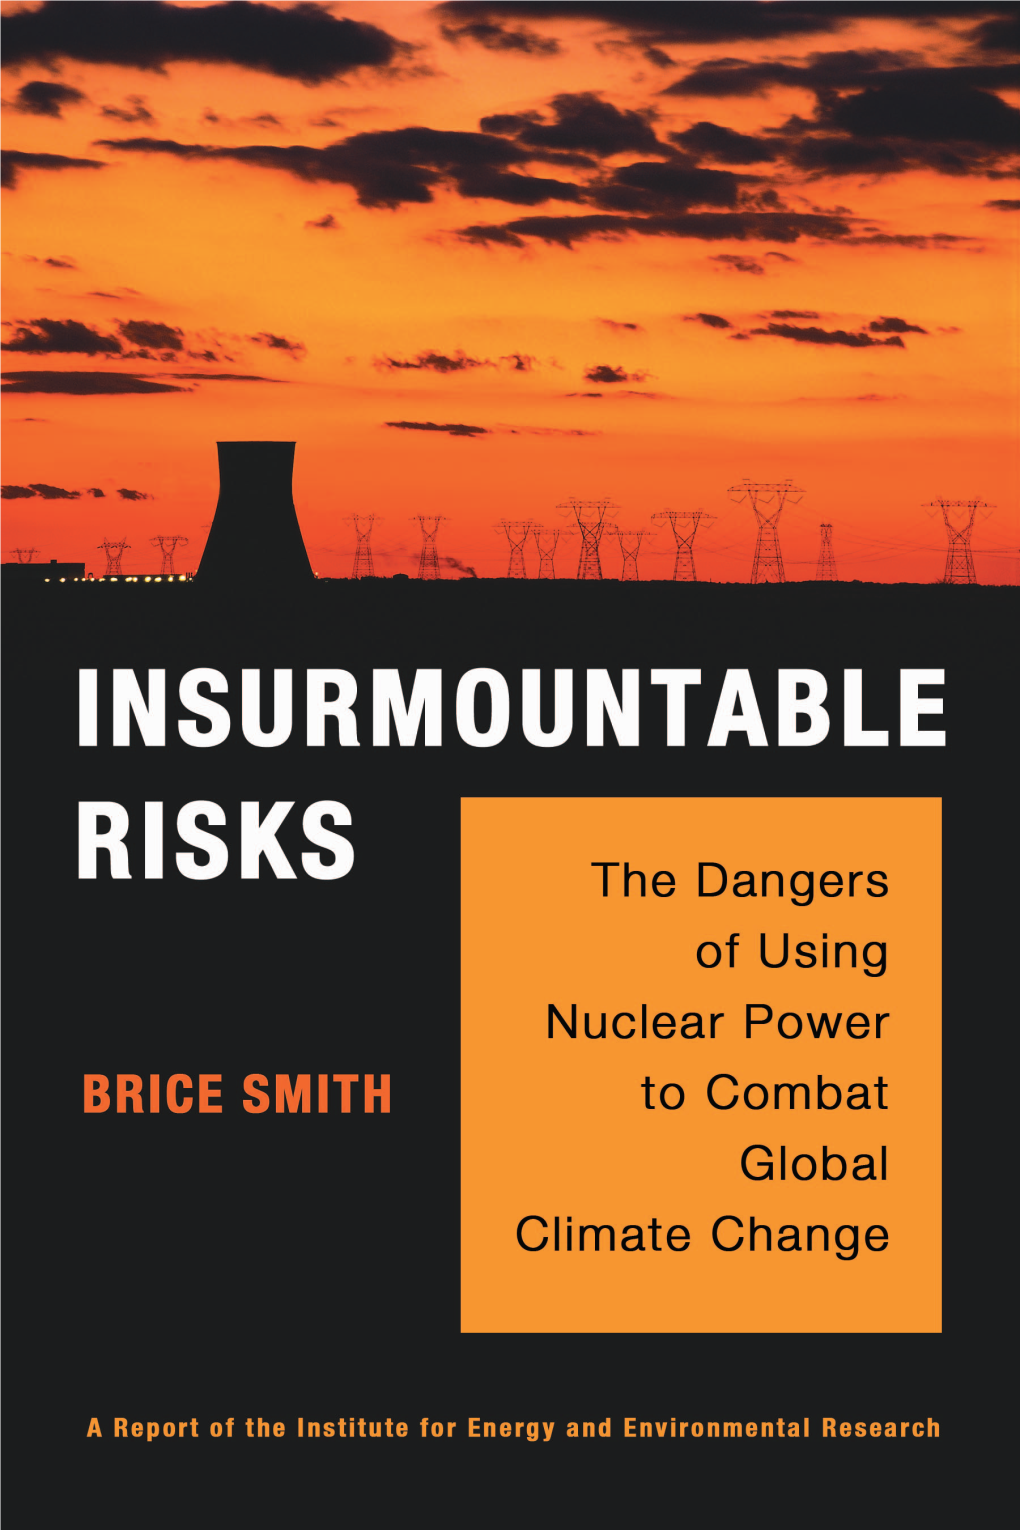 Insurmountable Risks: the Dangers of Using Nuclear Power to Combat